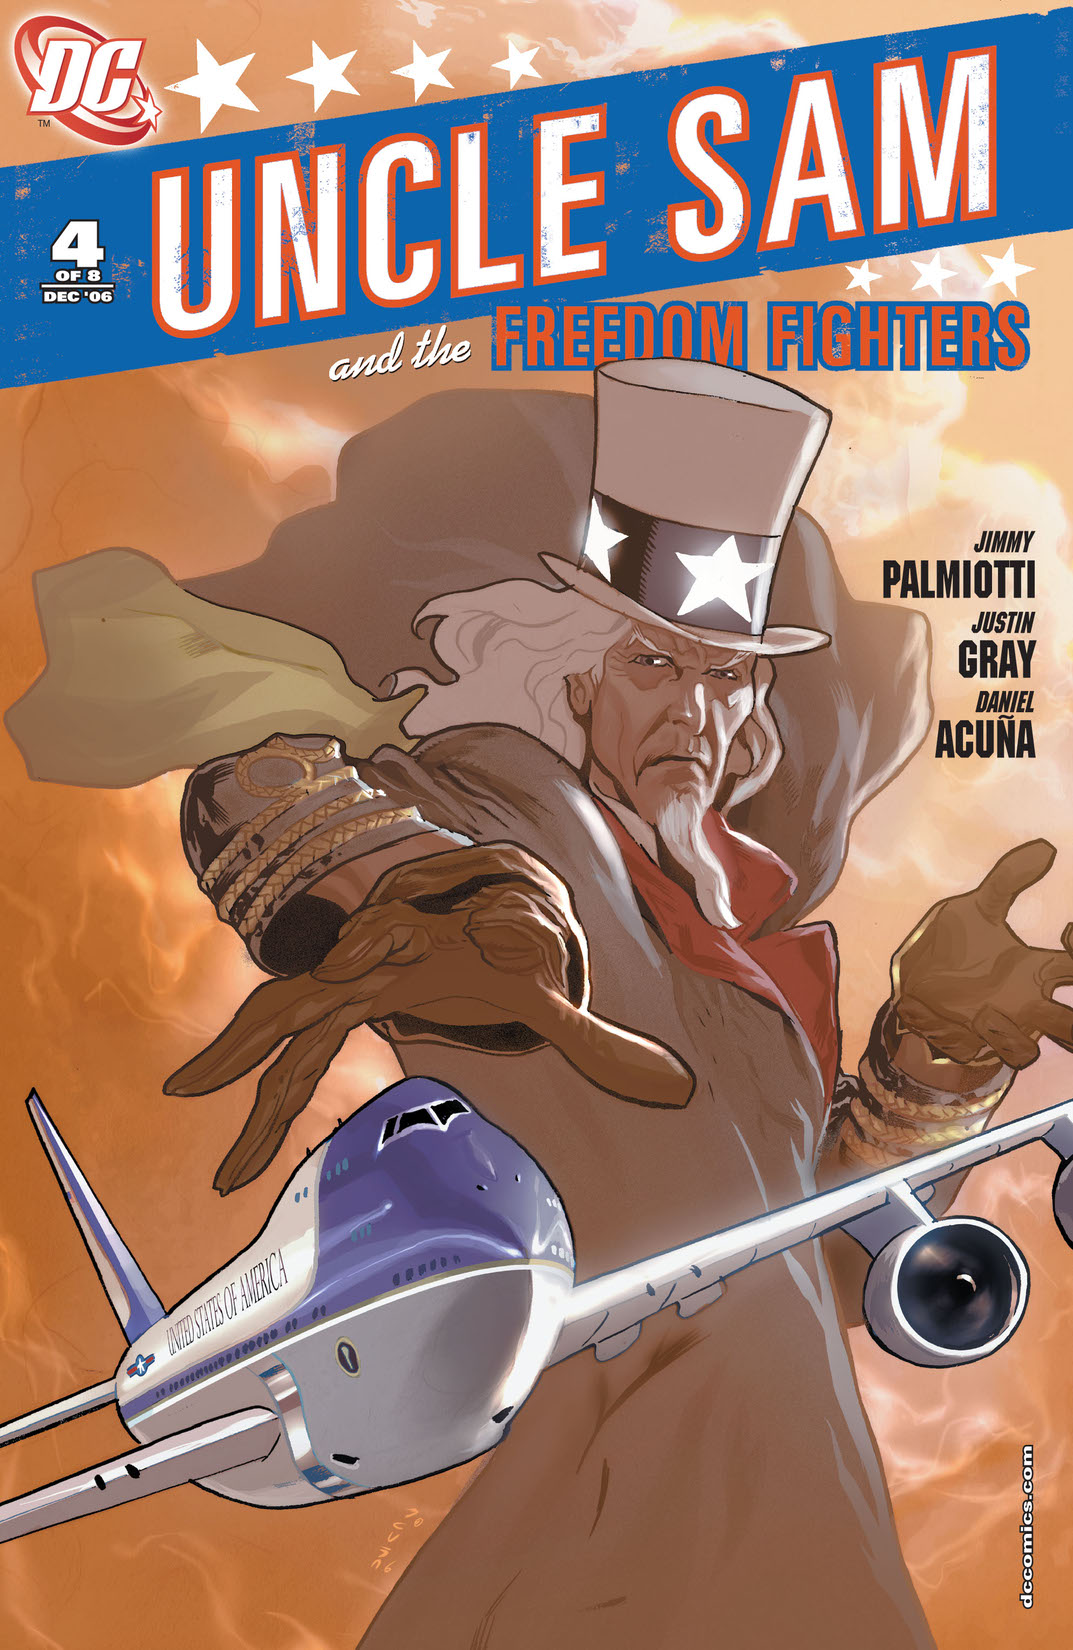 Uncle Sam and the Freedom Fighters (2006-) #4 preview images